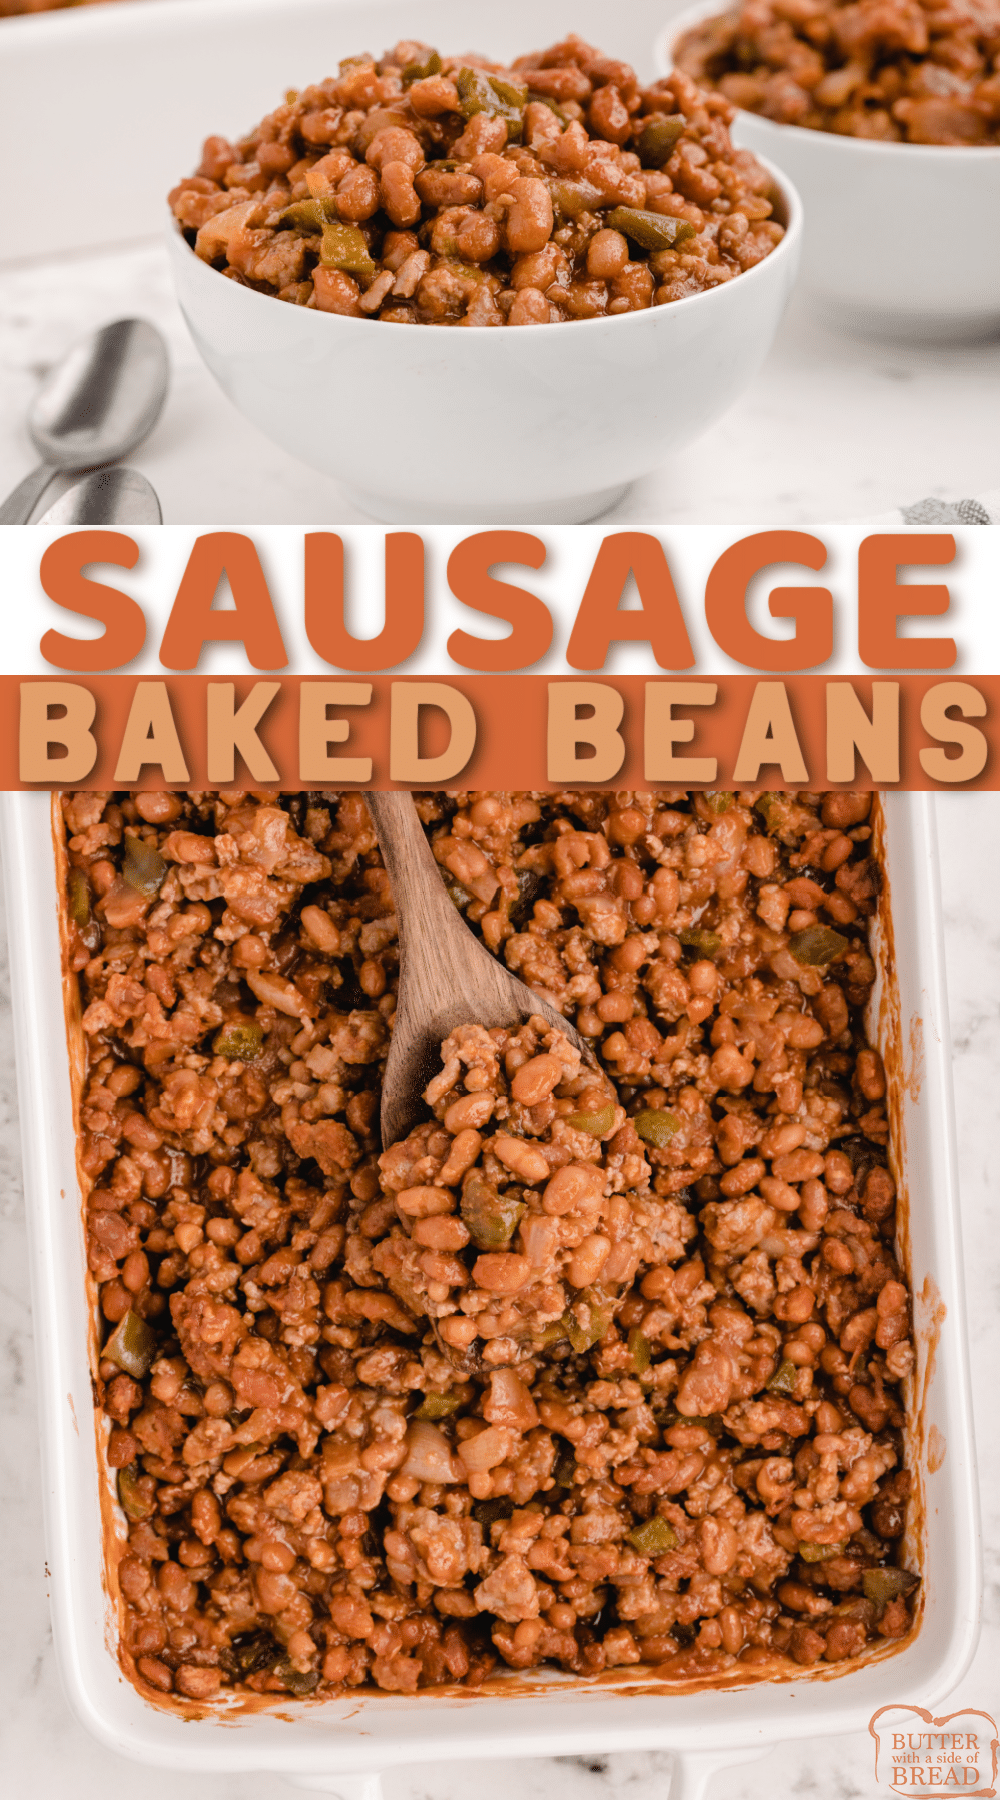 Sausage Baked Beans made by adding a few simple ingredients to canned beans. Delicious baked bean recipe with sausage, green pepper, onion, ketchup and brown sugar. 